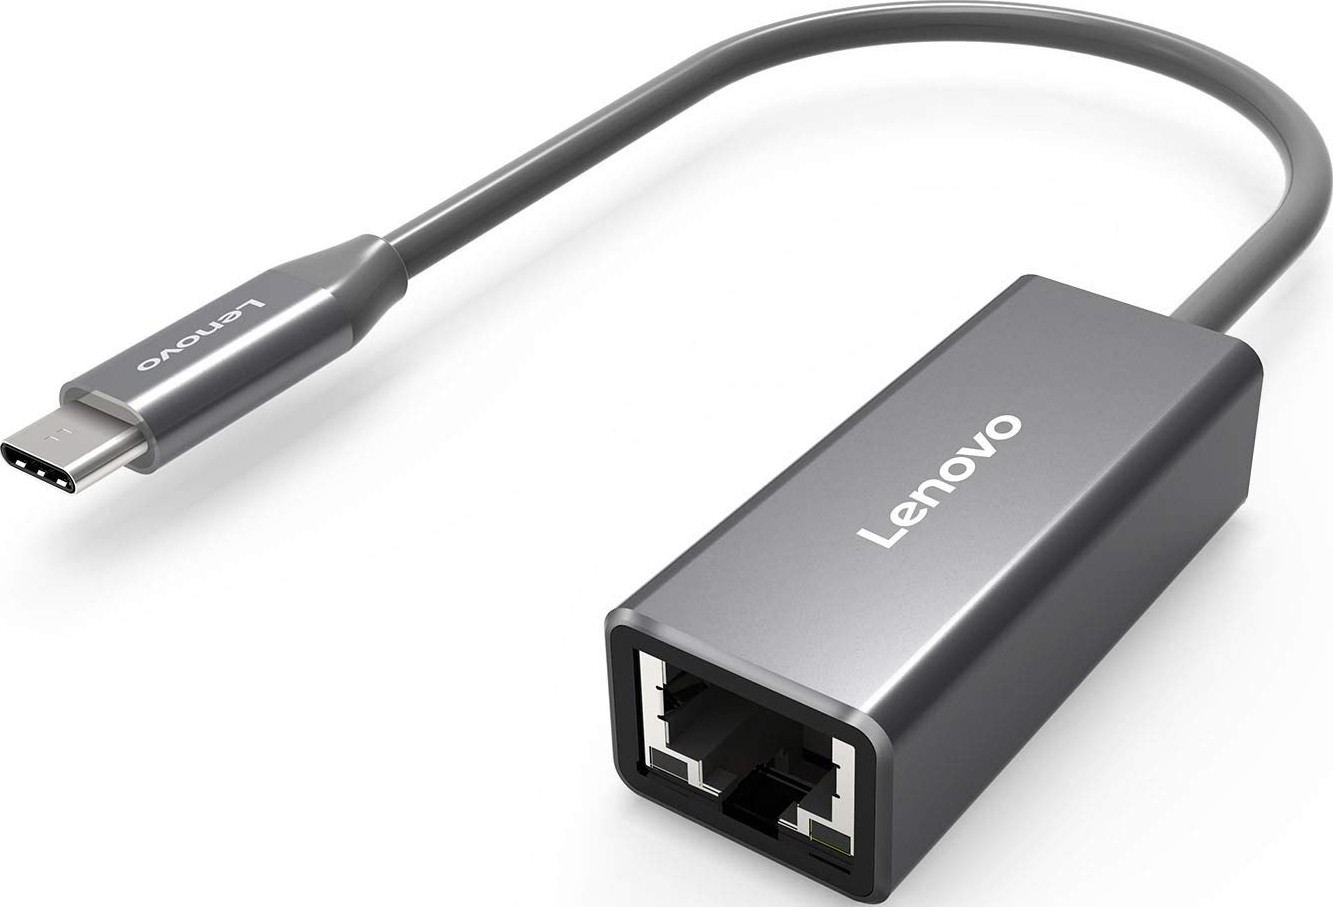 10 Perks of Using an Ethernet Adapter for Online Games